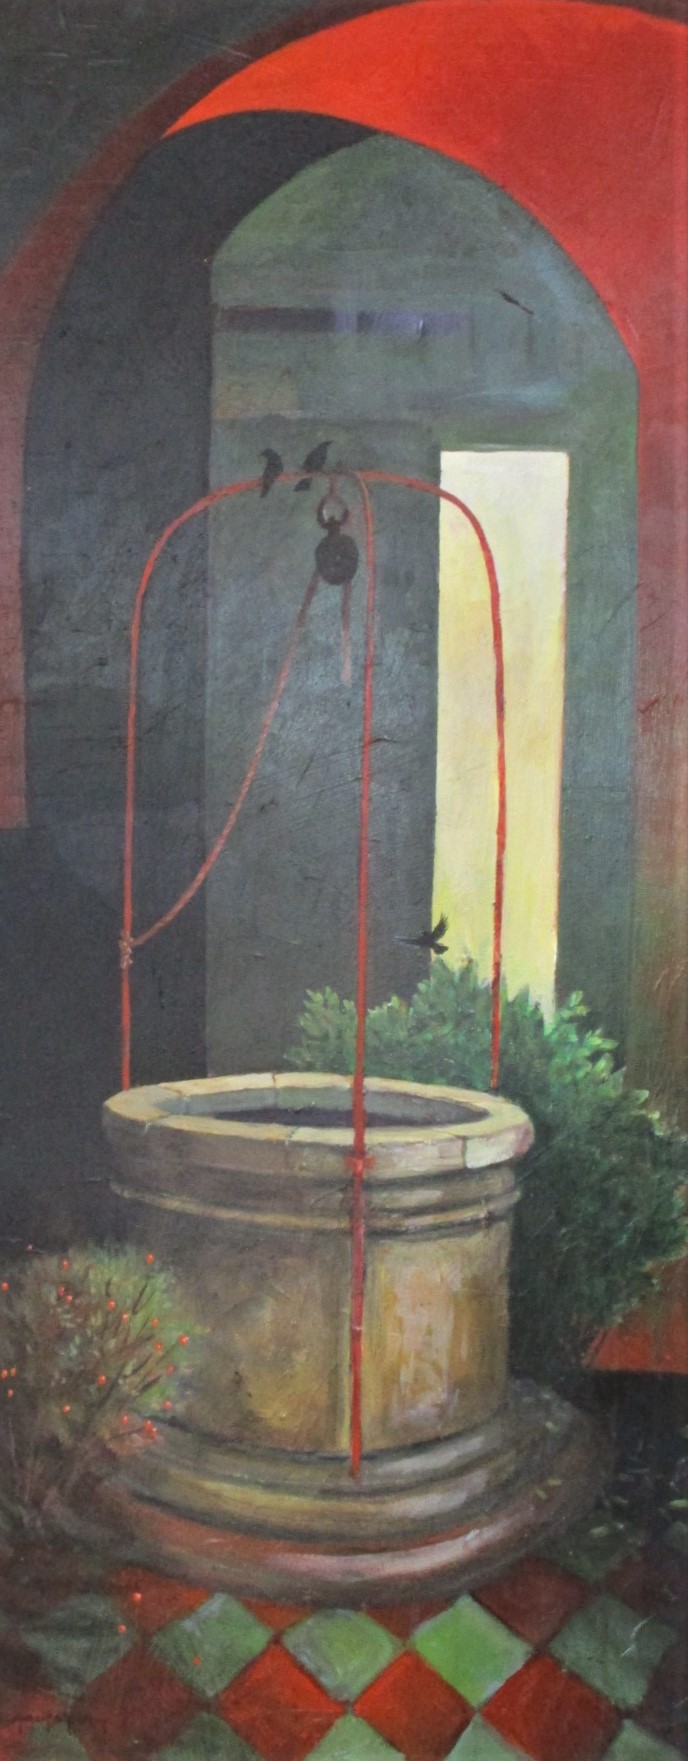 Wishing Well by  Michael Schlicting - Masterpiece Online